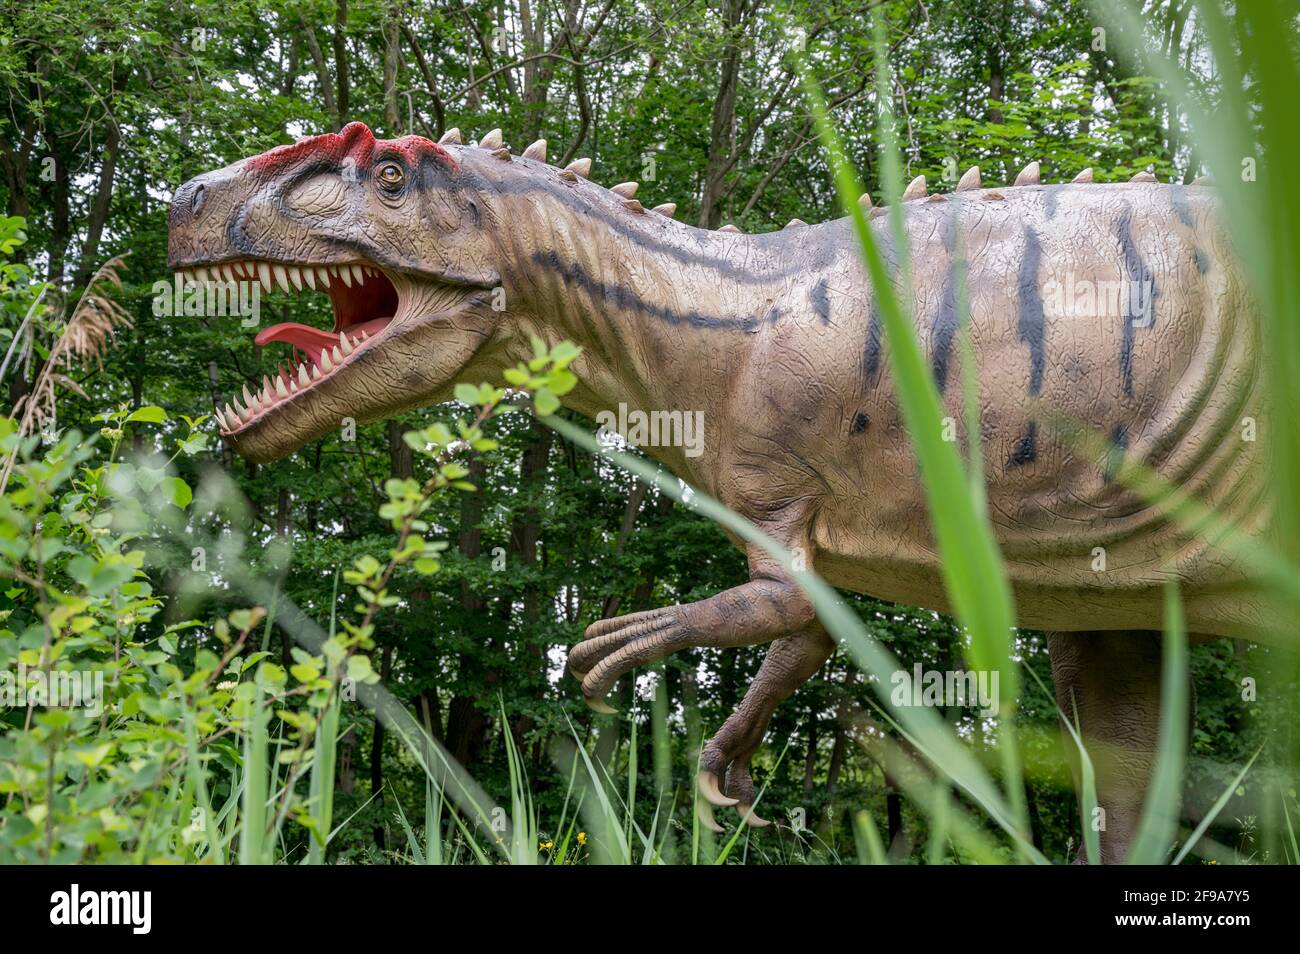 Dinosaur Allosaurus (similar to the Tyrannosaurus) as a model in the Dinopark Münchehagen near Hanover. Lived about 150 million years ago (end of the Jurassic period) in North America and Europe, was about 9m long and 1.5t in weight. Stock Photo